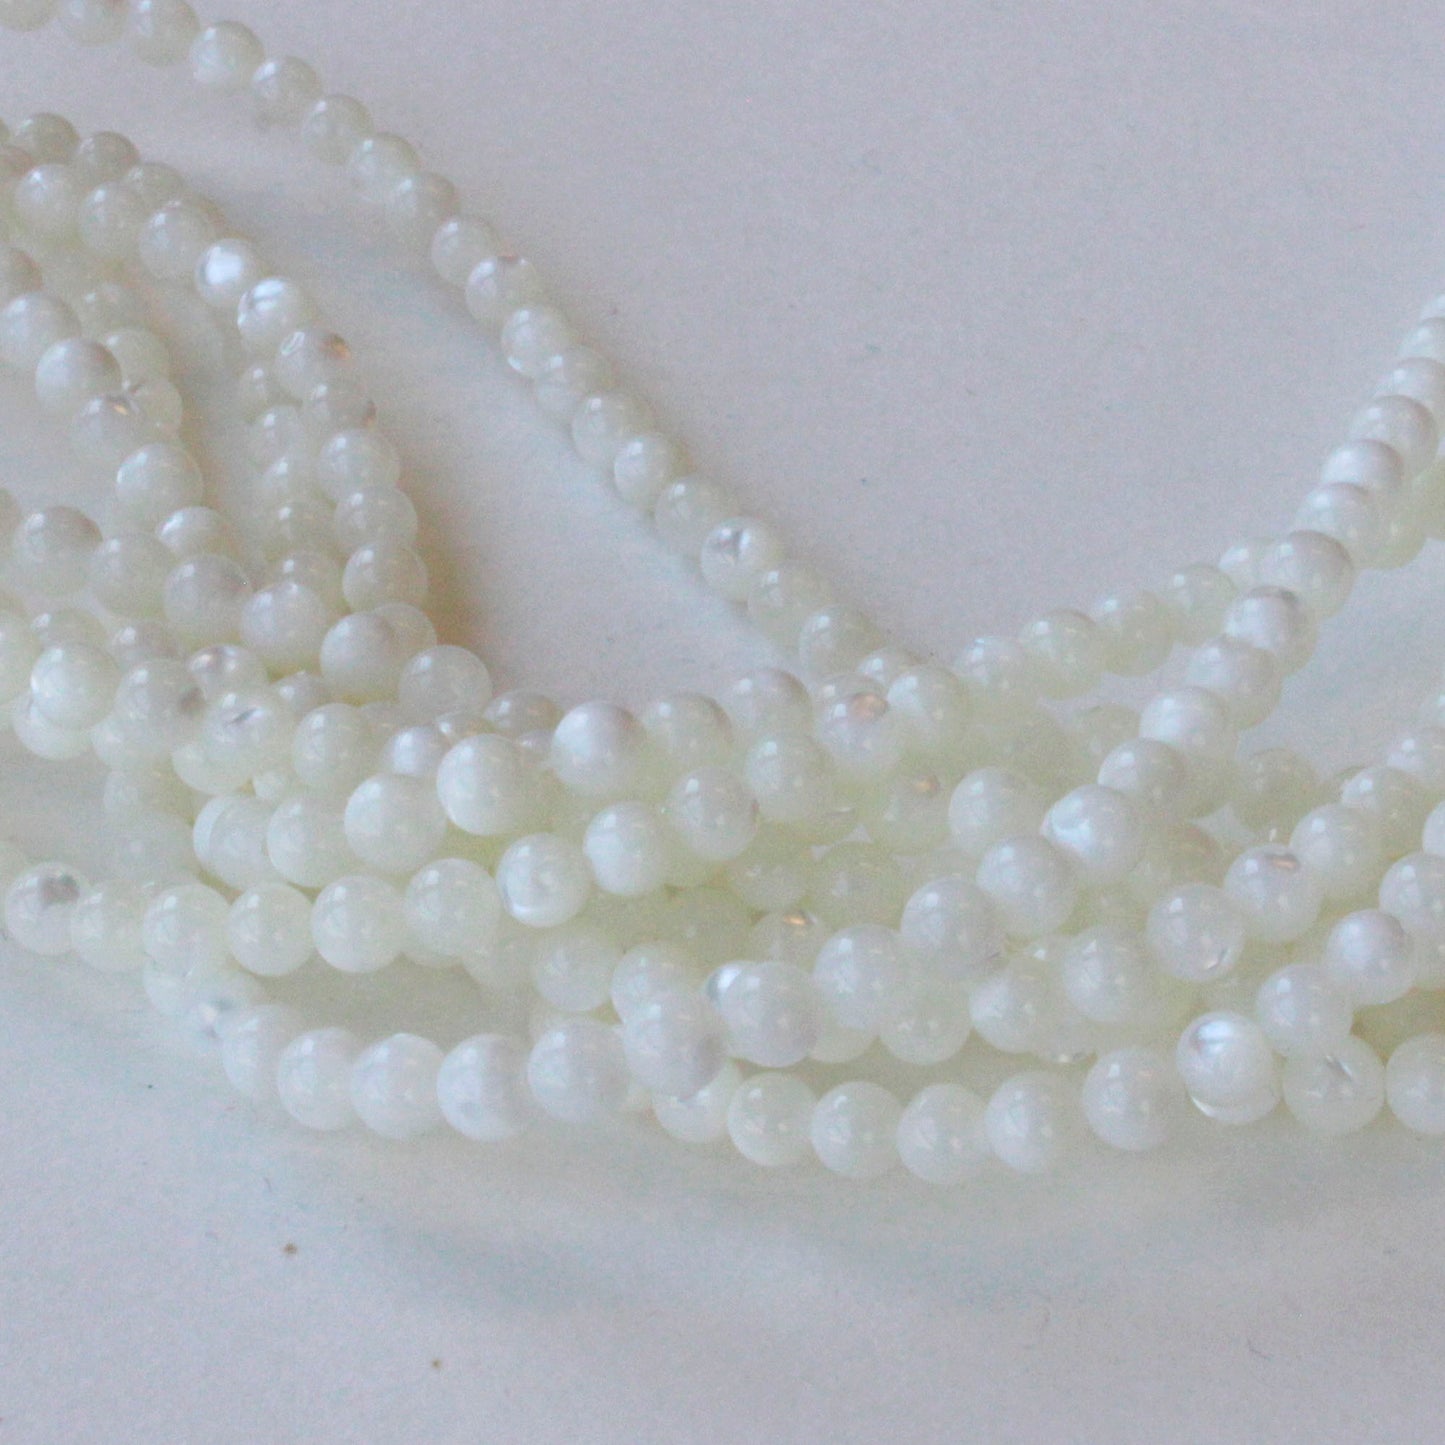 4mm Round Mother of Pearl - 16 inches